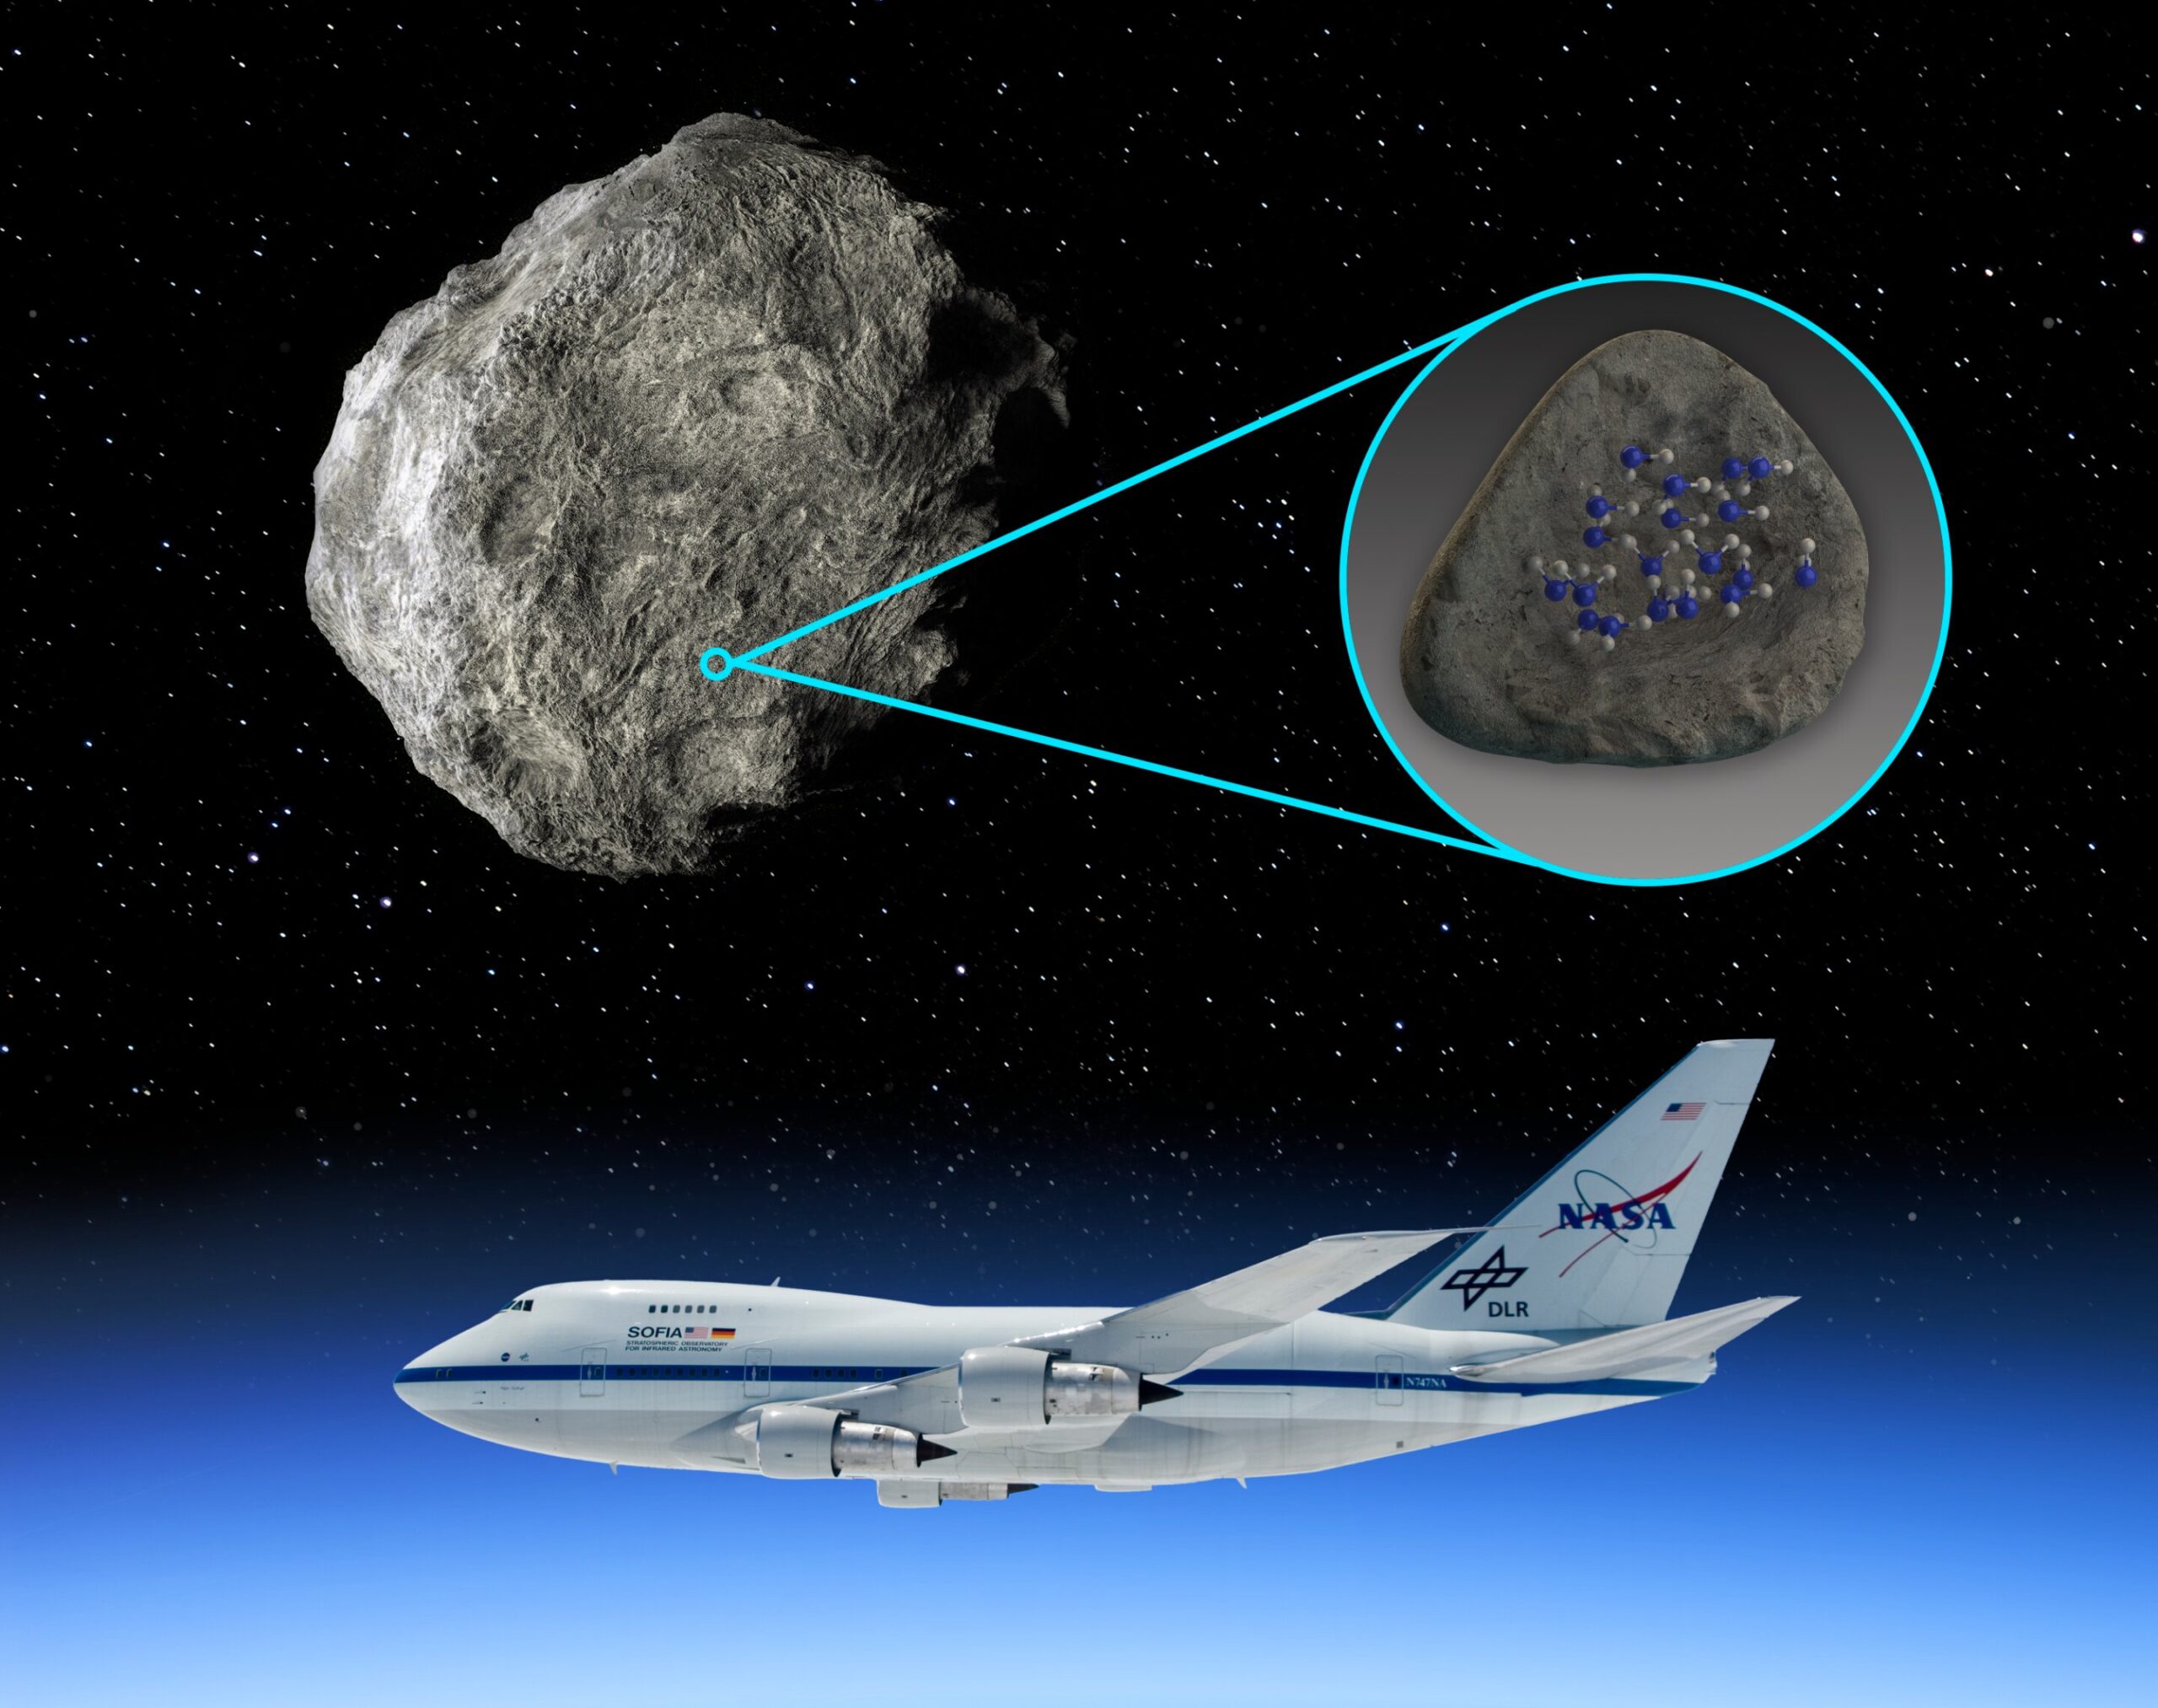 Signs of water presence found on asteroids